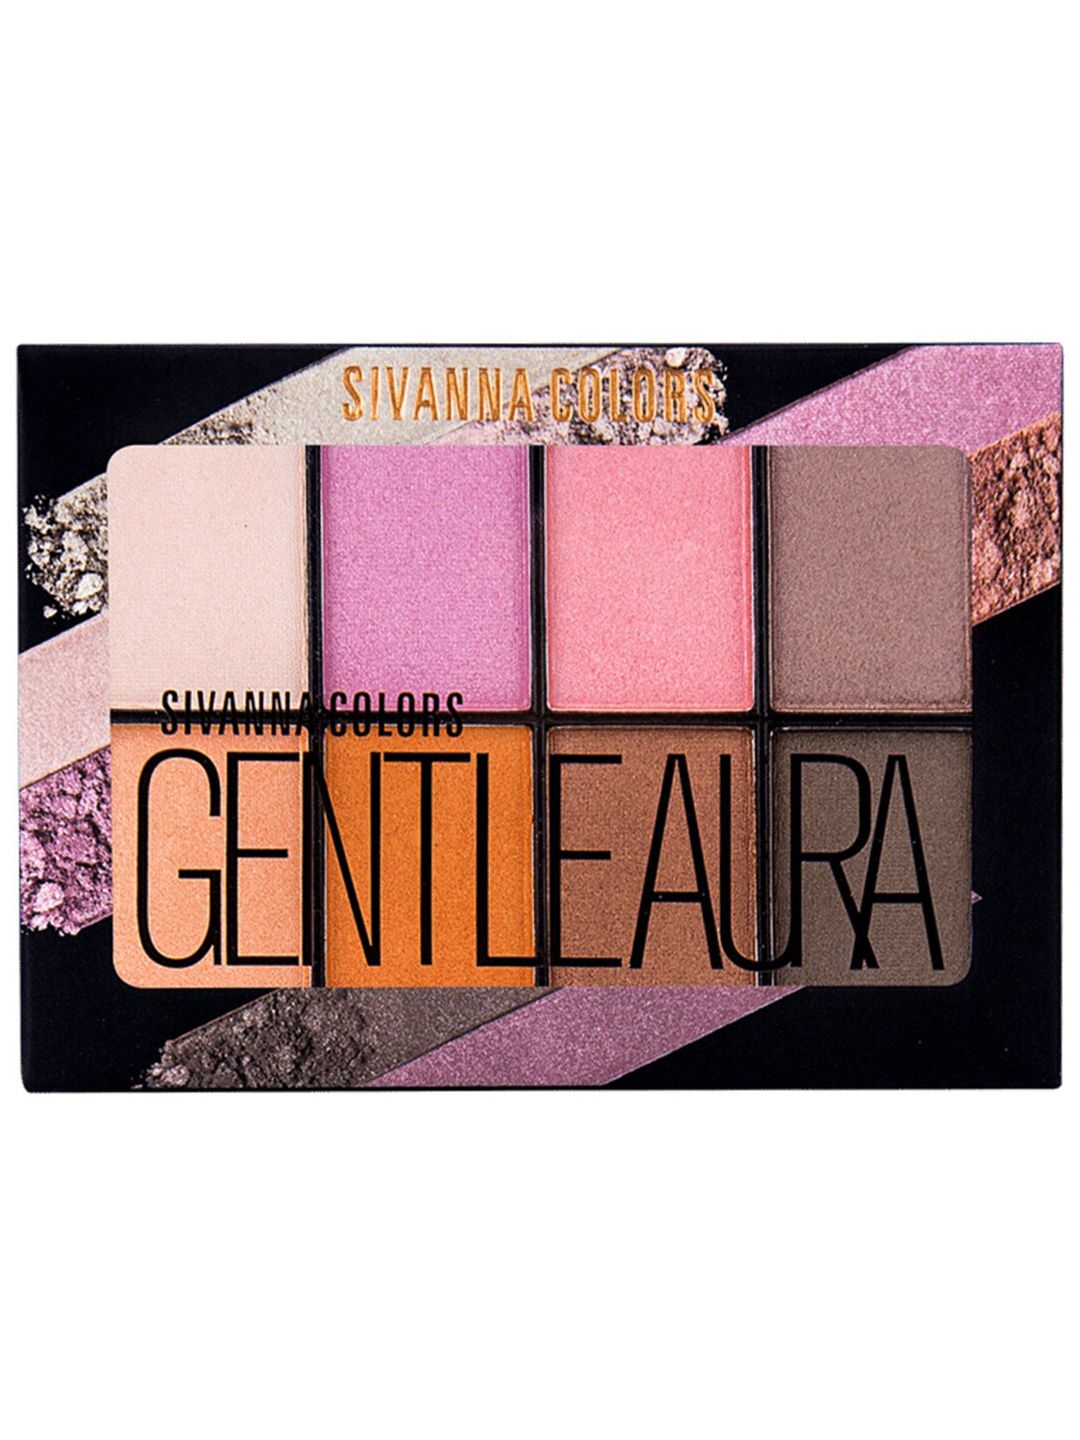 Sivanna Colors Gentle Aura Eye Shadow Palette - HF597 01 Price in India